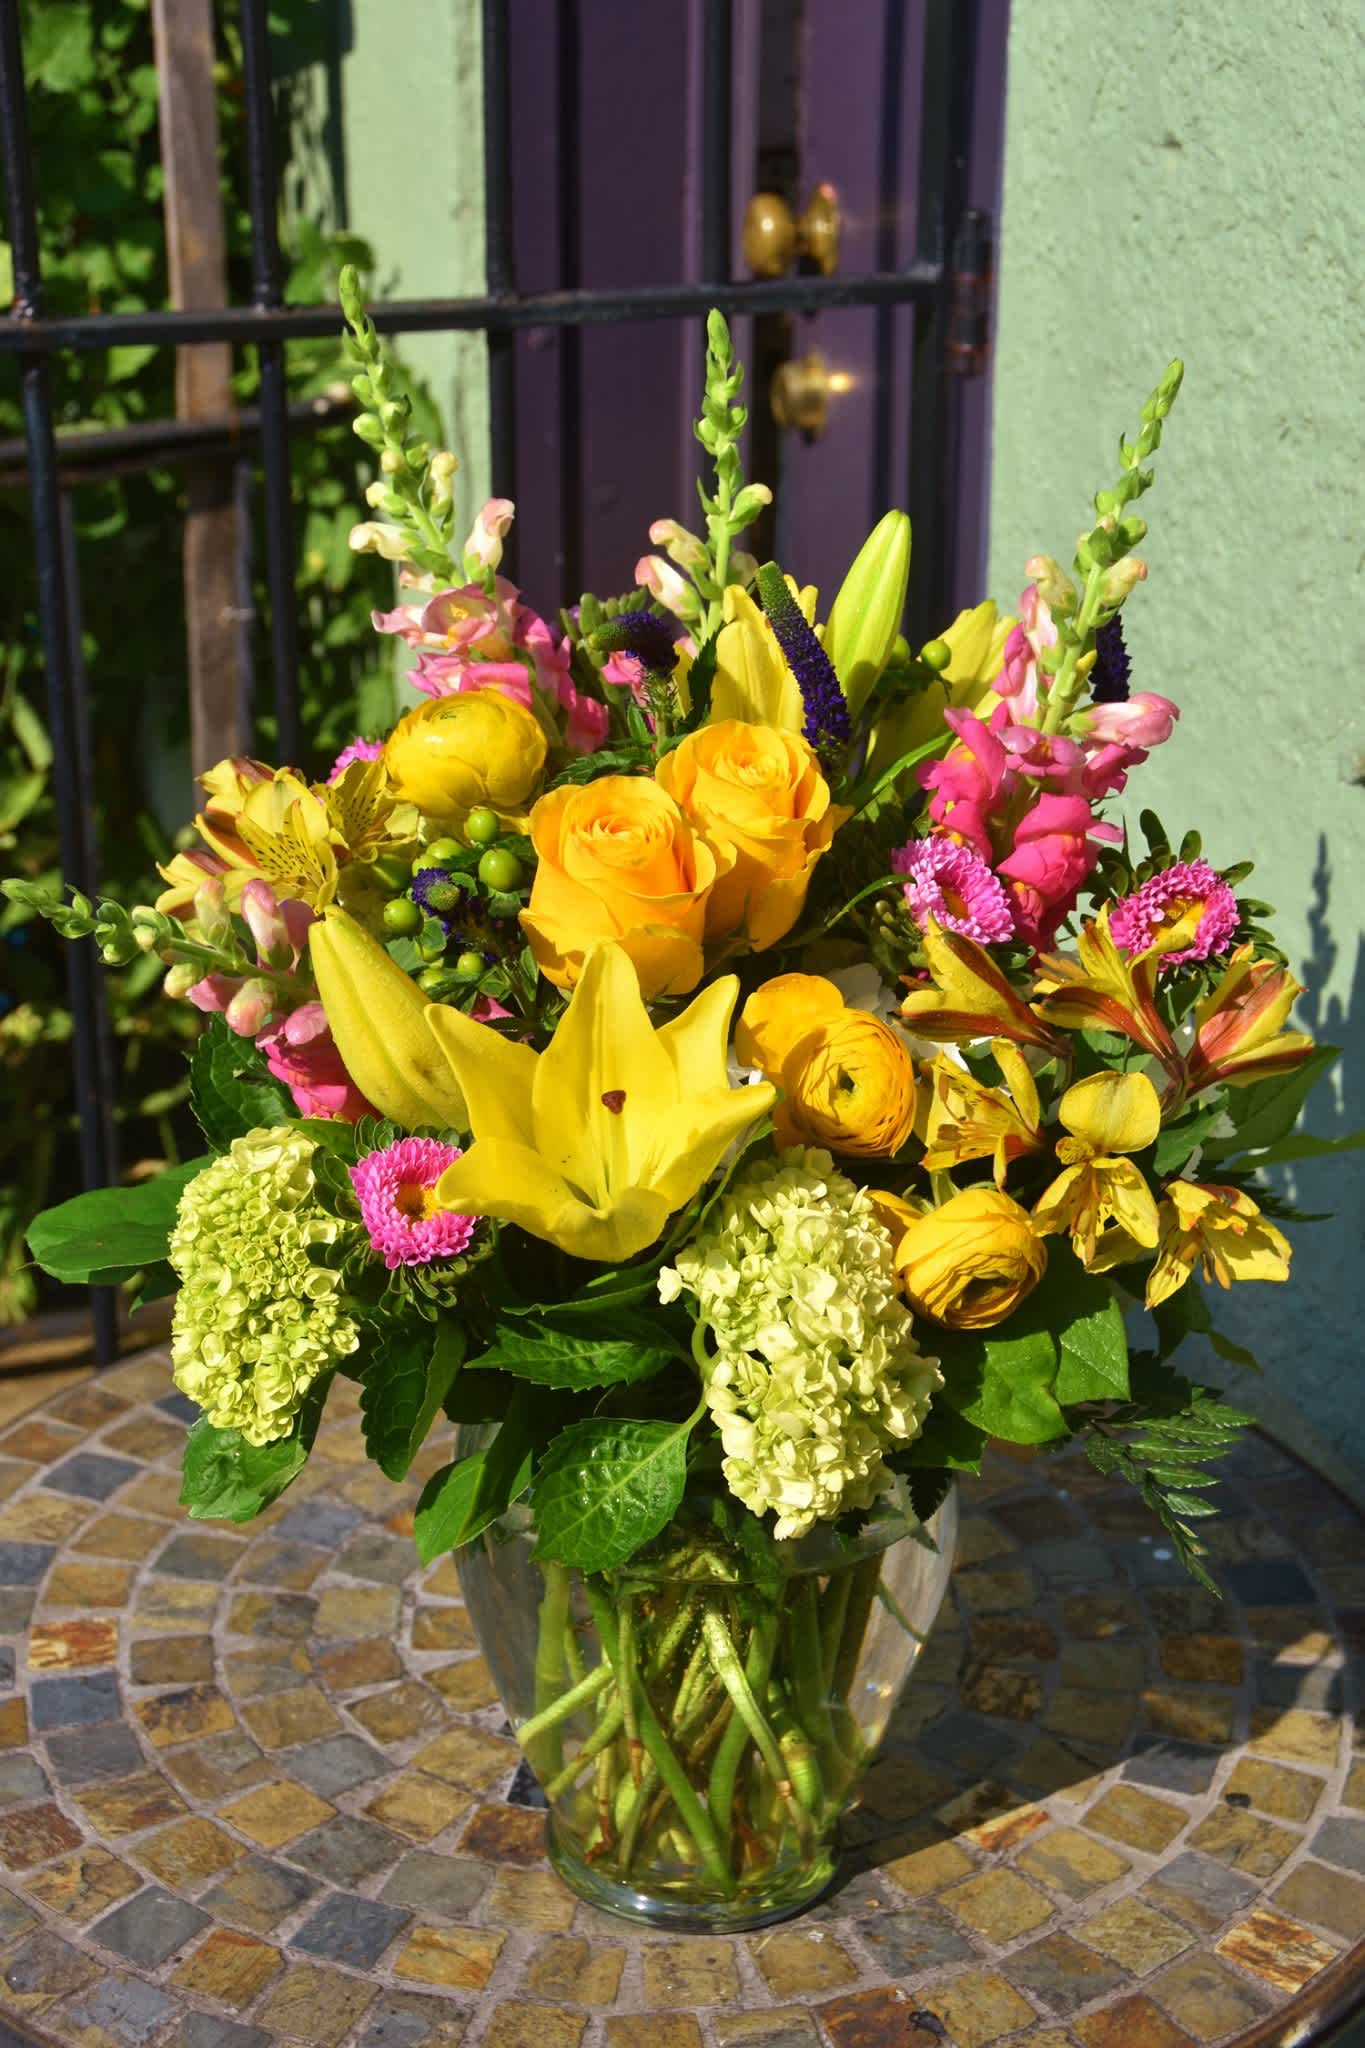 Sunday Sunshine - Bright sunshine flowers such as lilies, hydrangea, snapdragon, ranunculus, are designed in glass vase. Send a happy vibe to someone who needs them now!